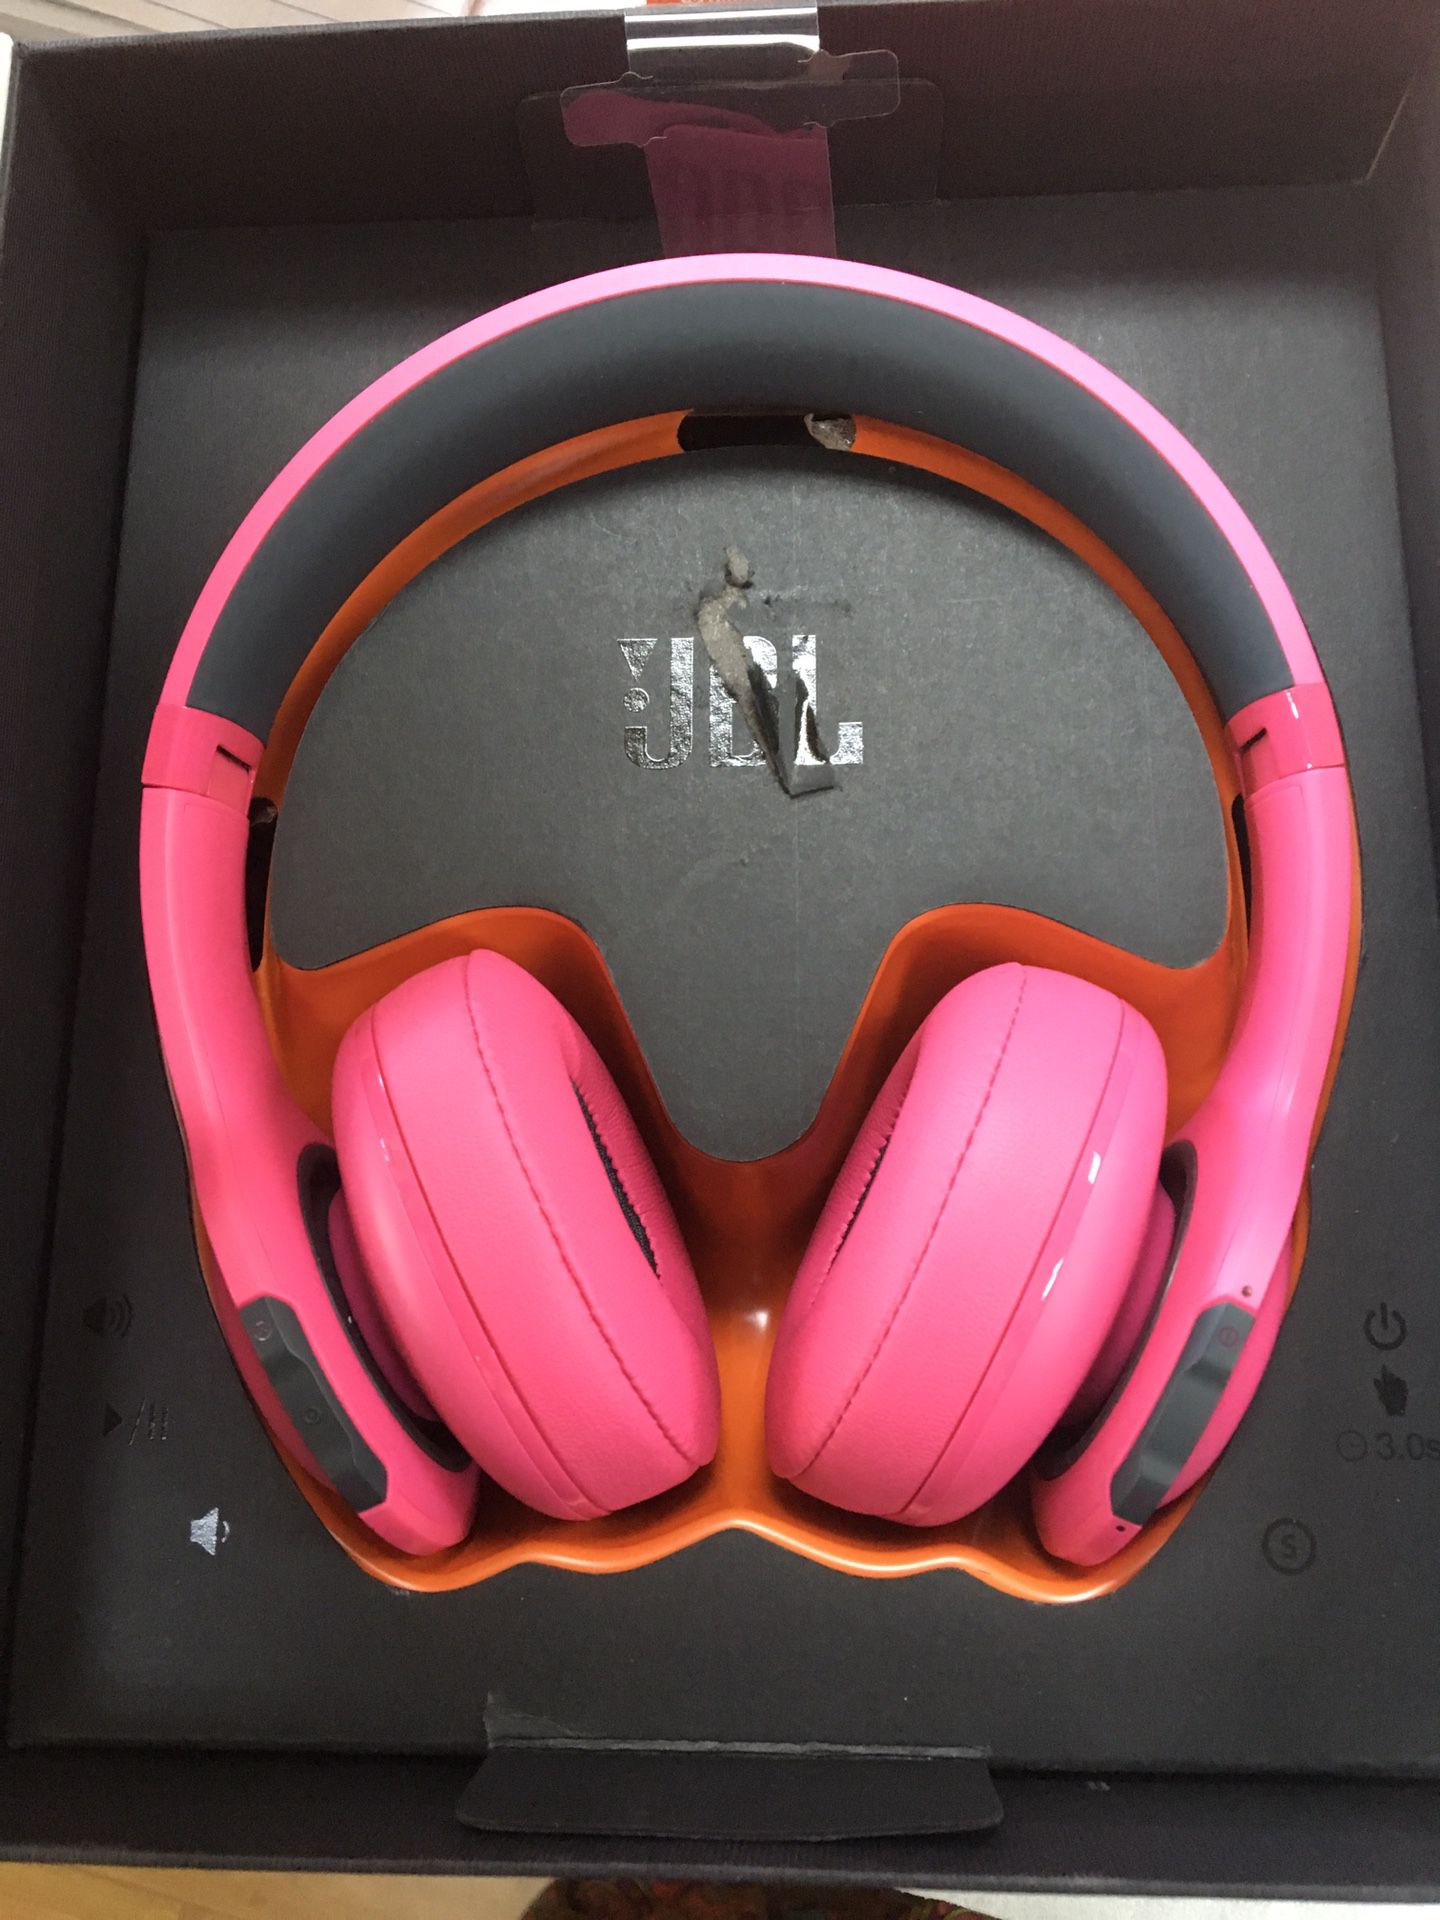 JBL Everest 300 Hot Pink Wireless Headphones in Excellent Condition - Tested, Working